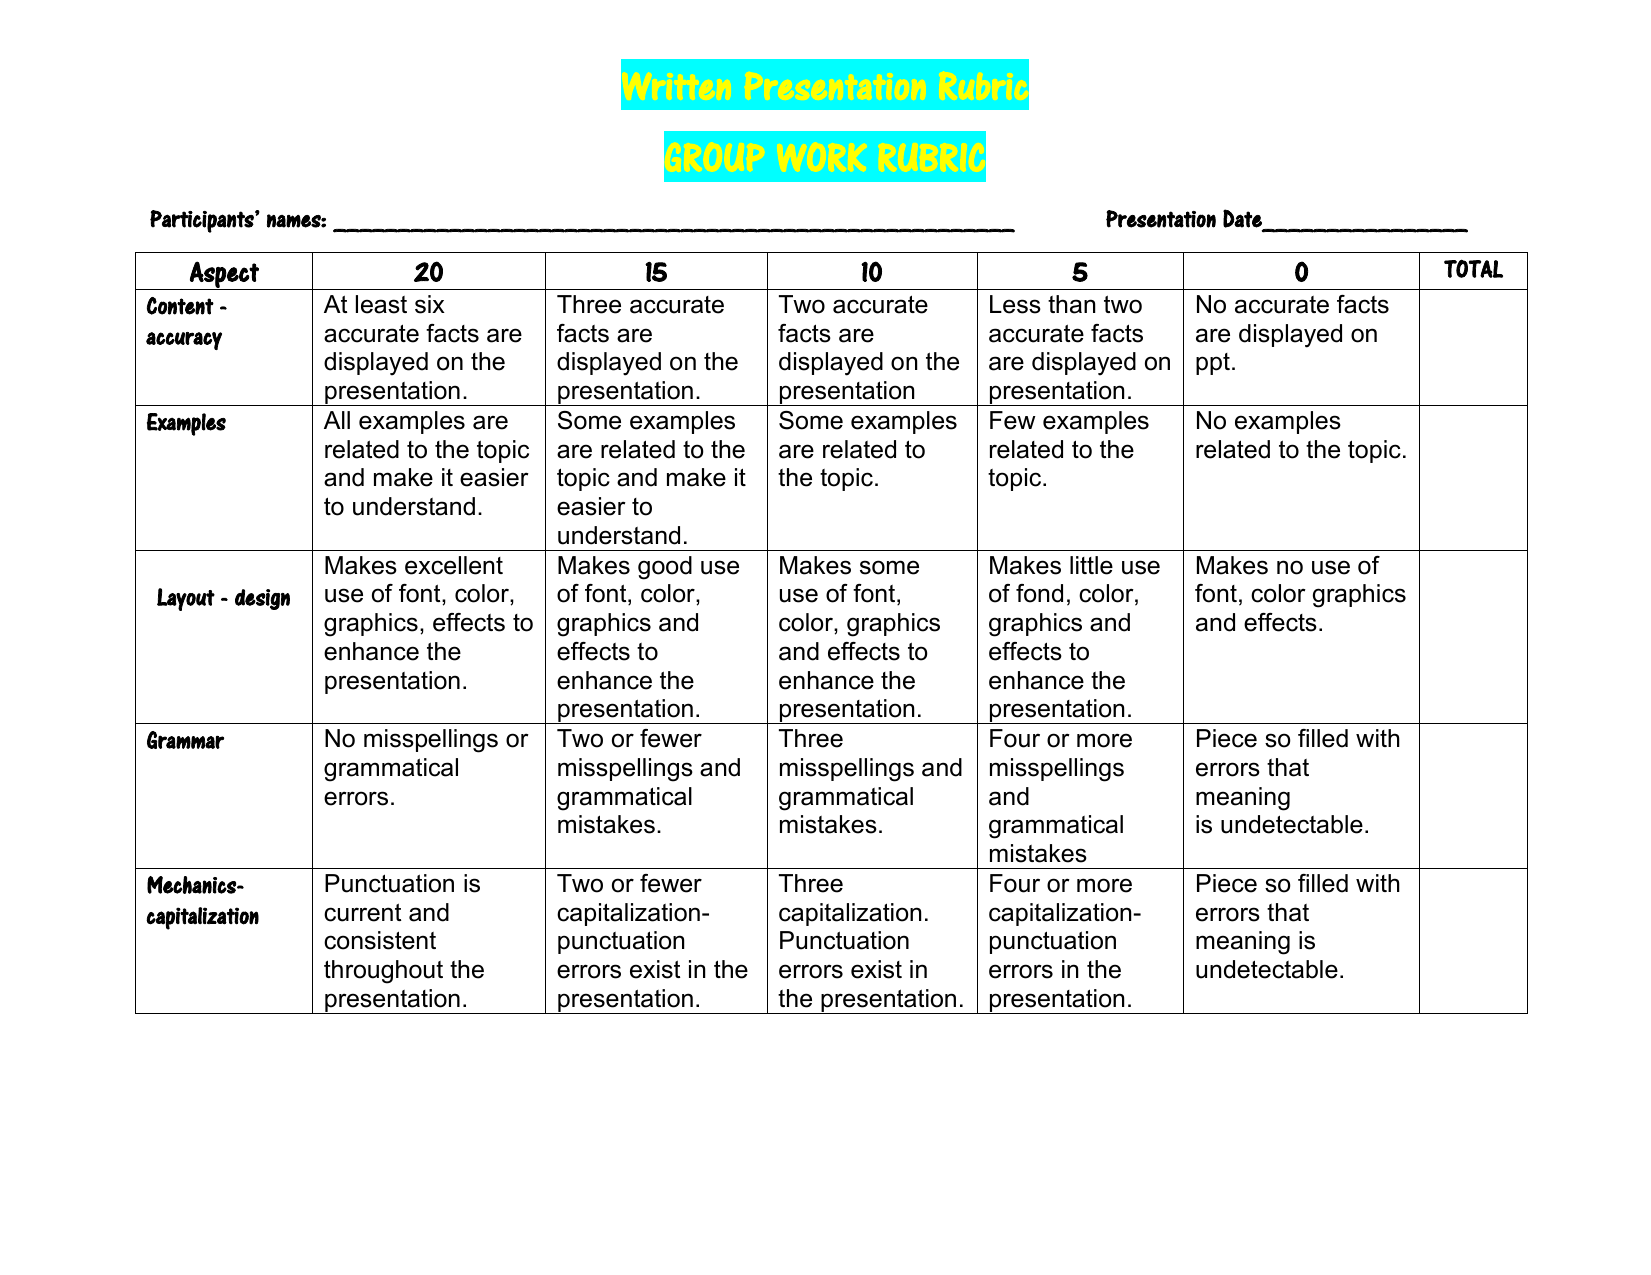 rubric for group project presentation